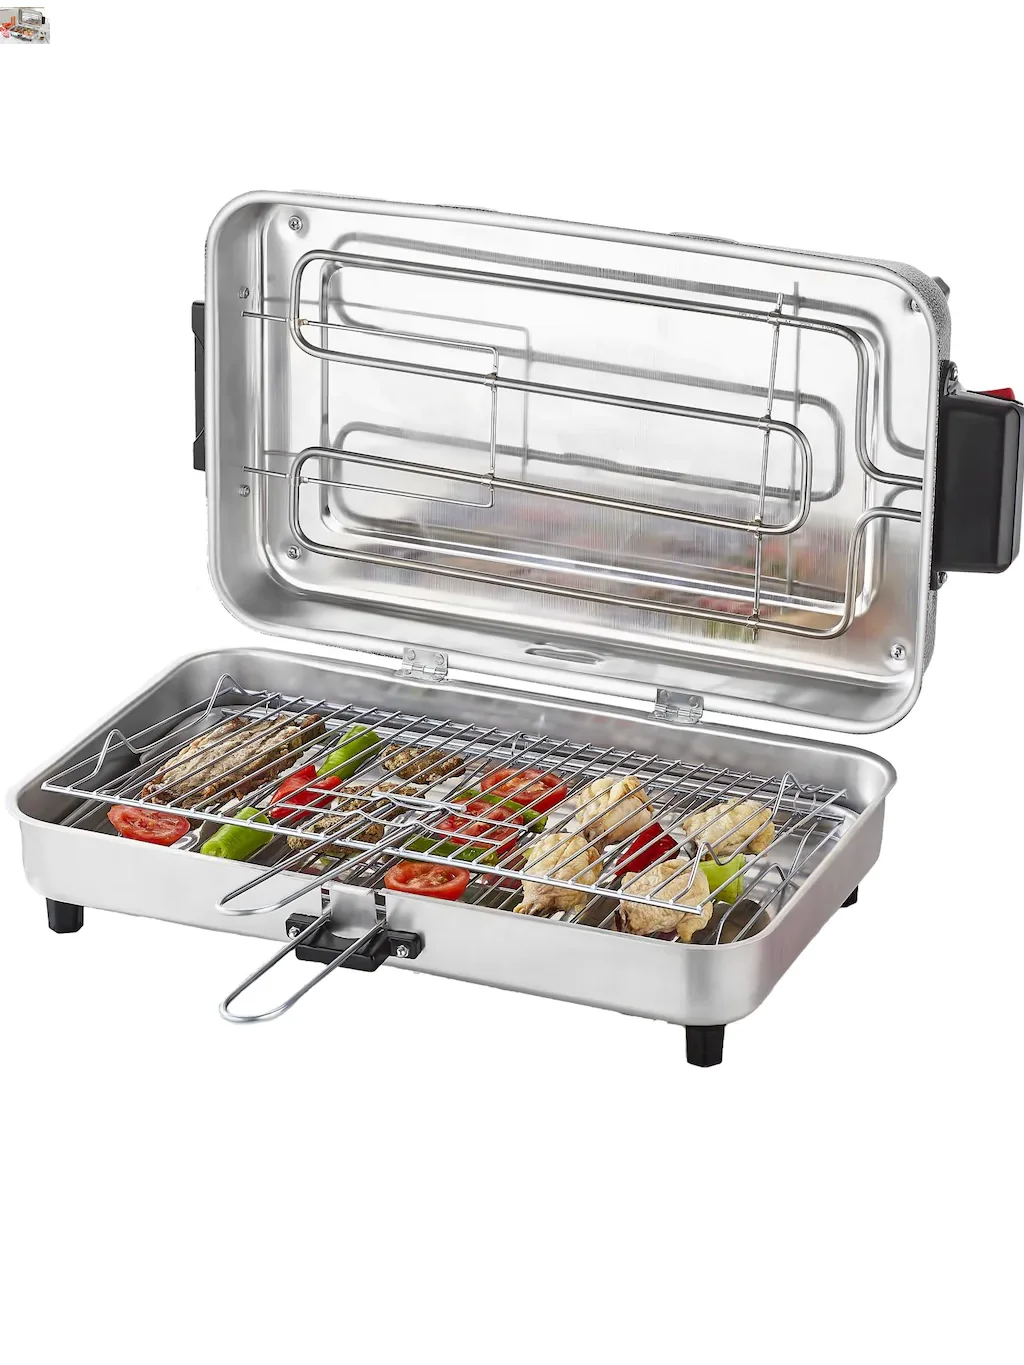 Lux Electric Grill, 4 Size Infrared Barbeque, No Smell No Smoke Aluminium Meat chicken easy clean fast  kitchen chefs